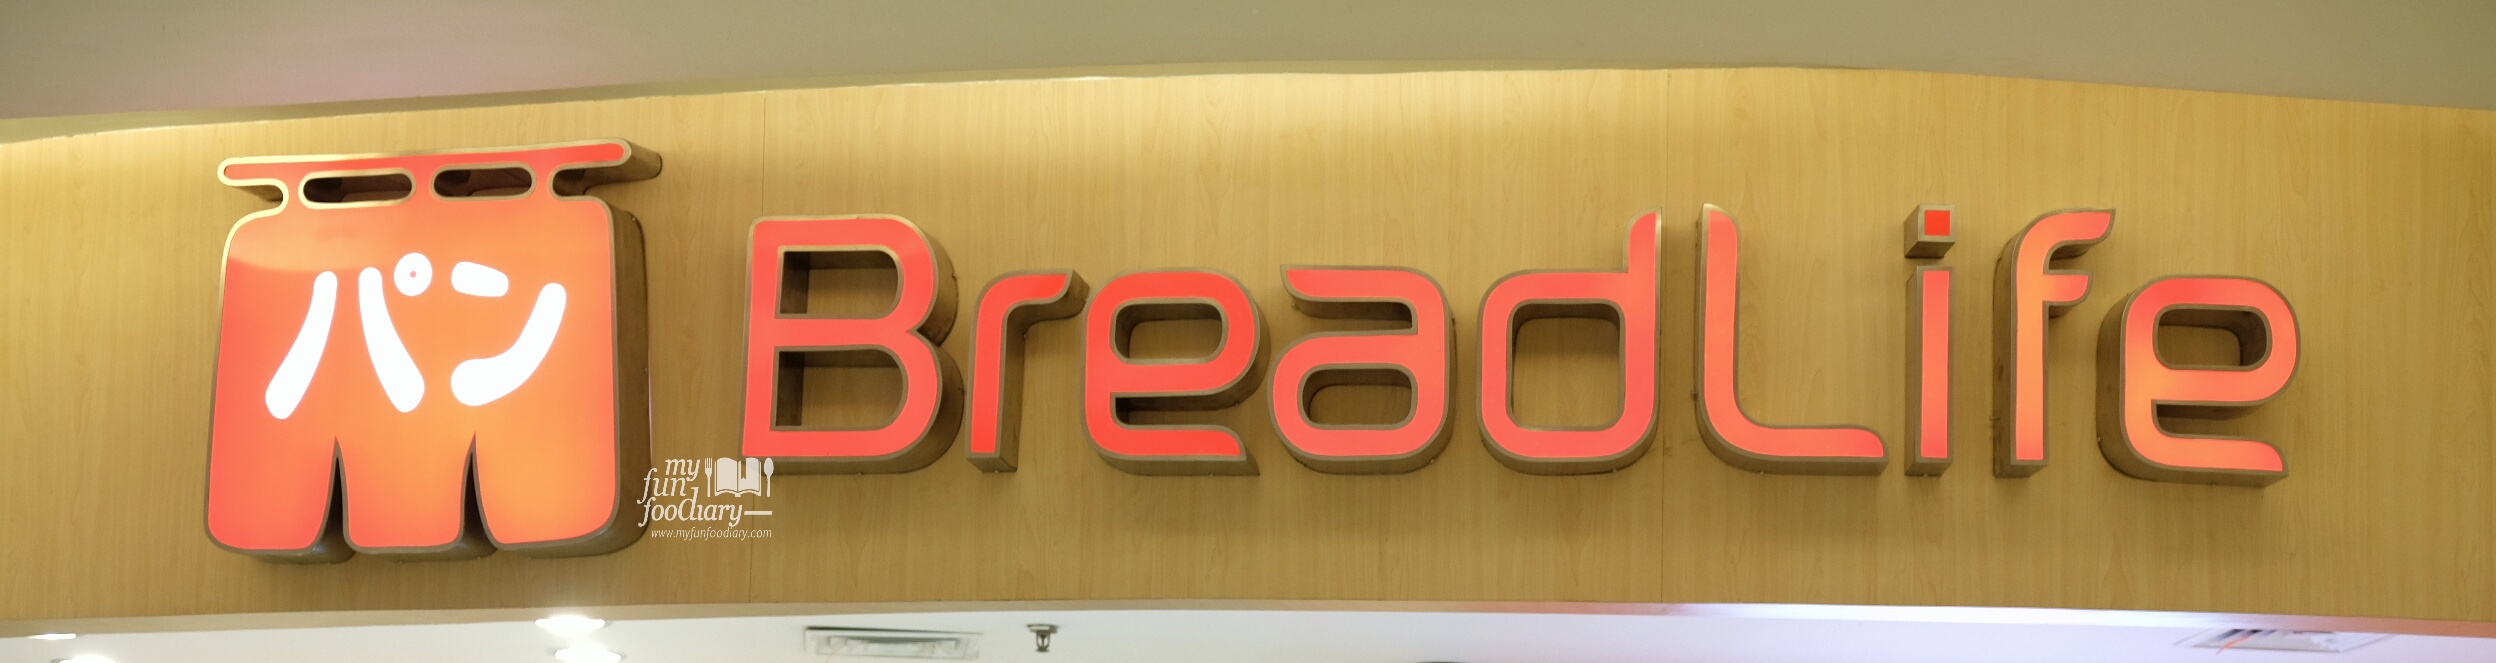 BreadLife New Logo and Concept at Central Park by Myfunfoodiary